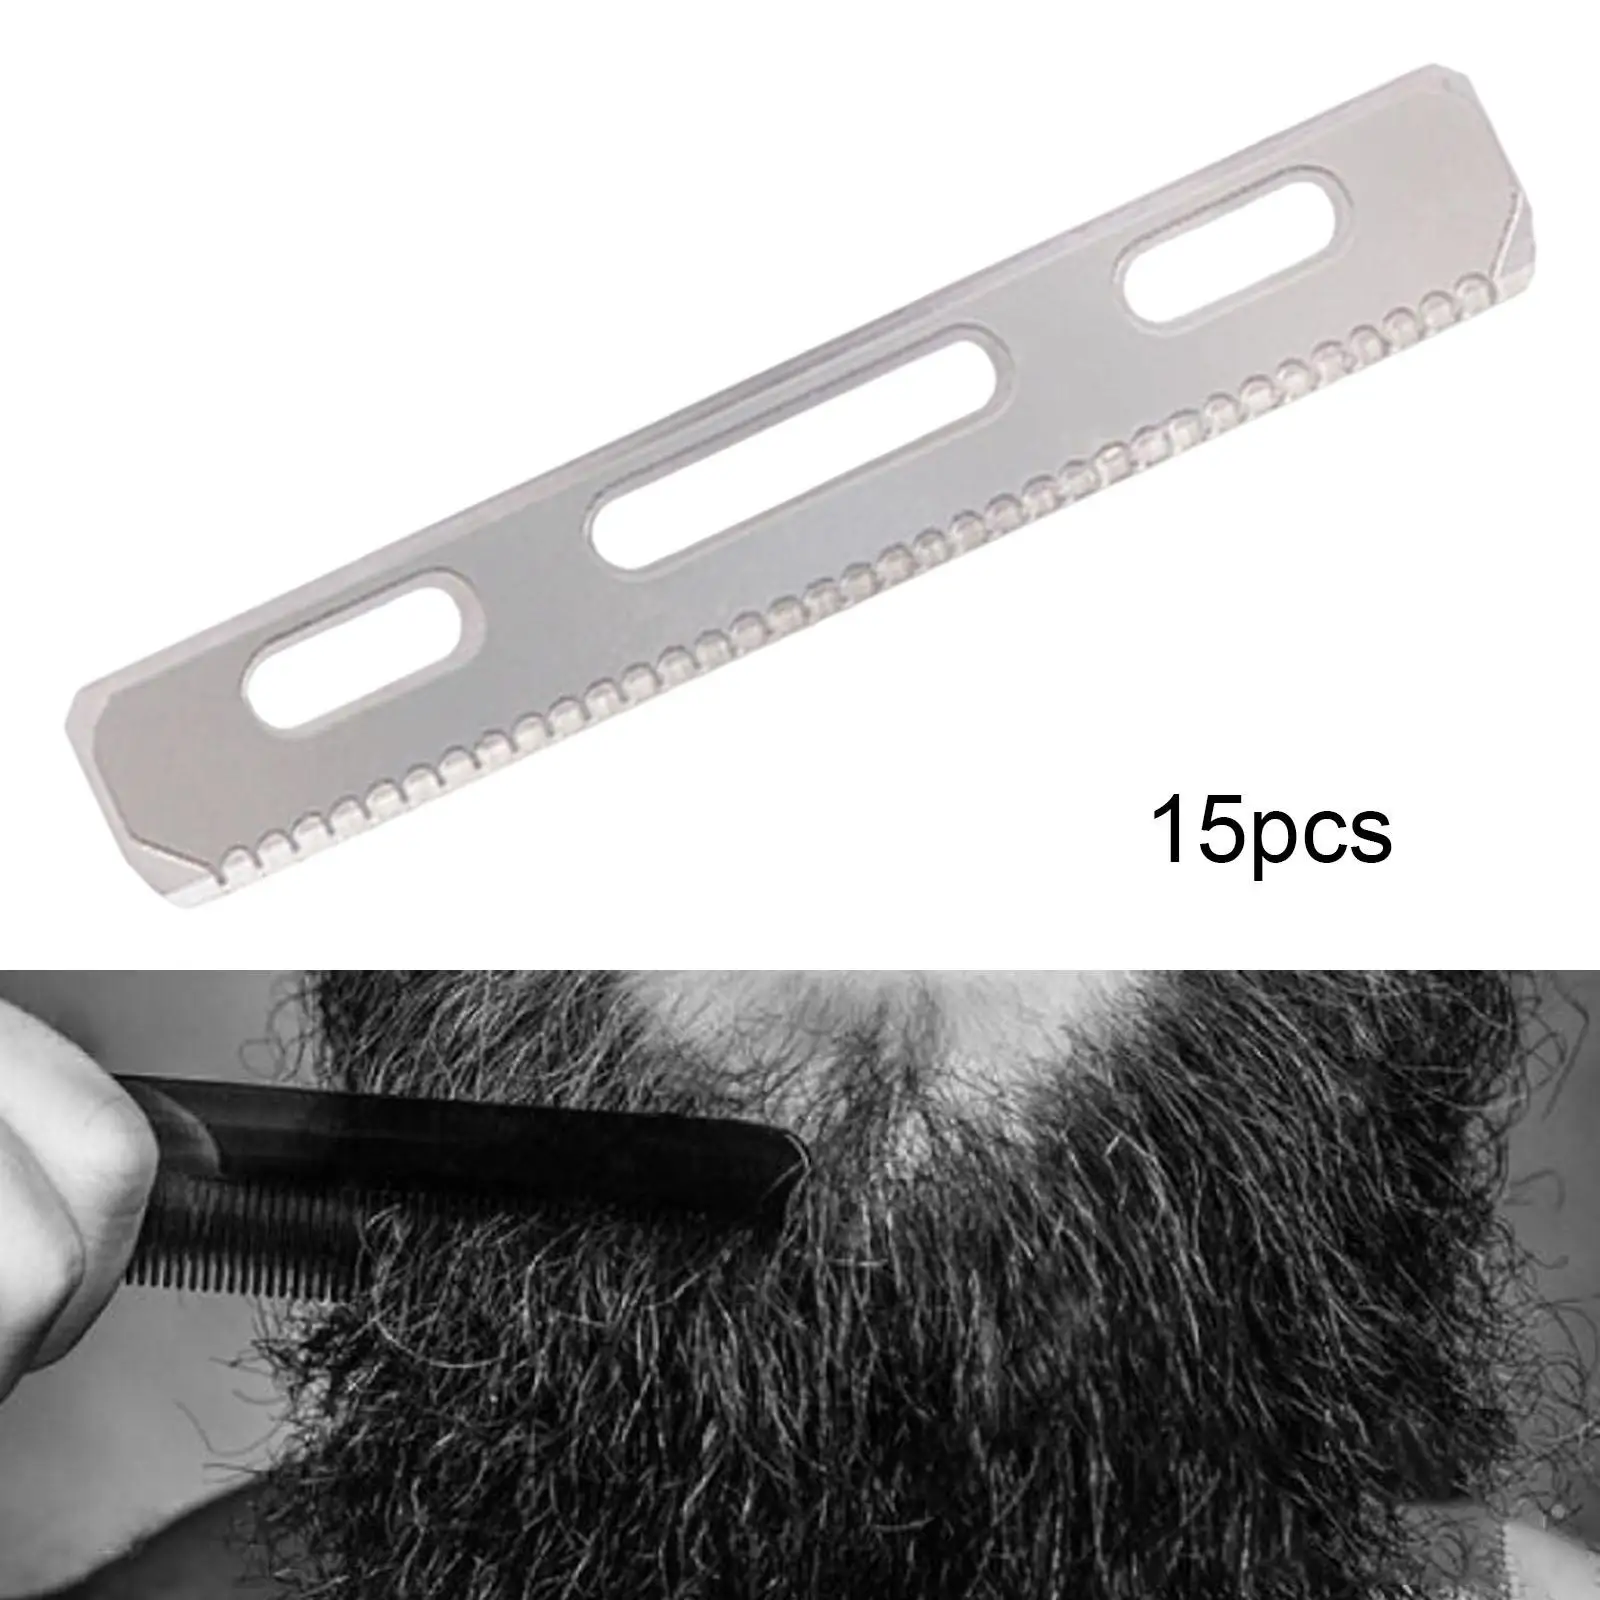 Eyebrow Trimmer Scraper Makeup Eyebrow Shaping hair Removal